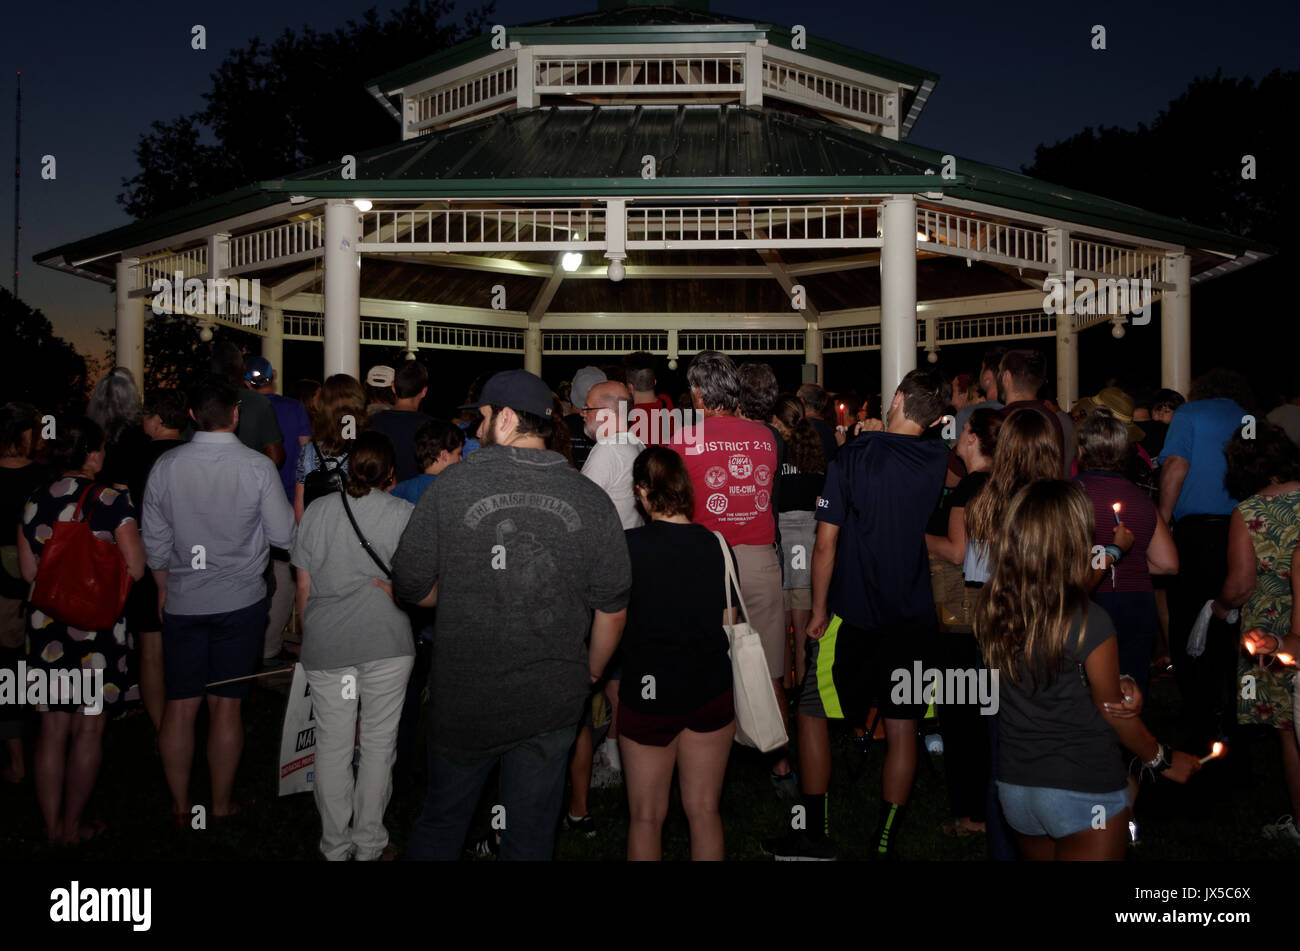 Gorgas Park in Philadelphia, USA. 13th August, 2017. Vigil in protest of the white supremacy march in Charlottesville, at Gorgas Park in Philadelphia Credit: Carlos Fernandez/Alamy Live News Stock Photo